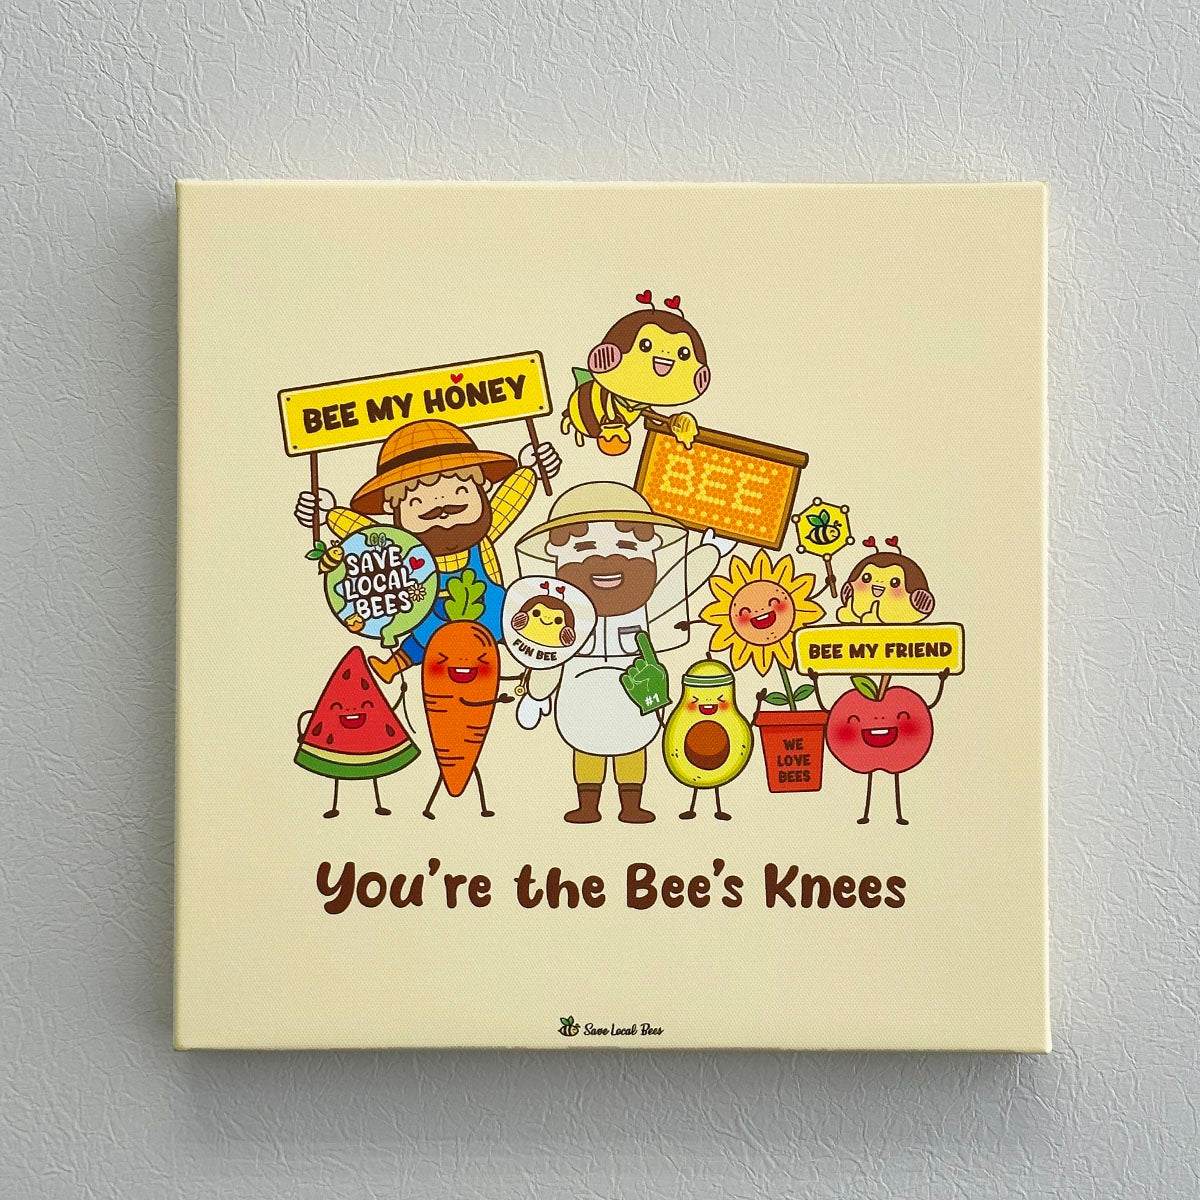 Save Local Bees 無框畫 - You're the Bee's Knees